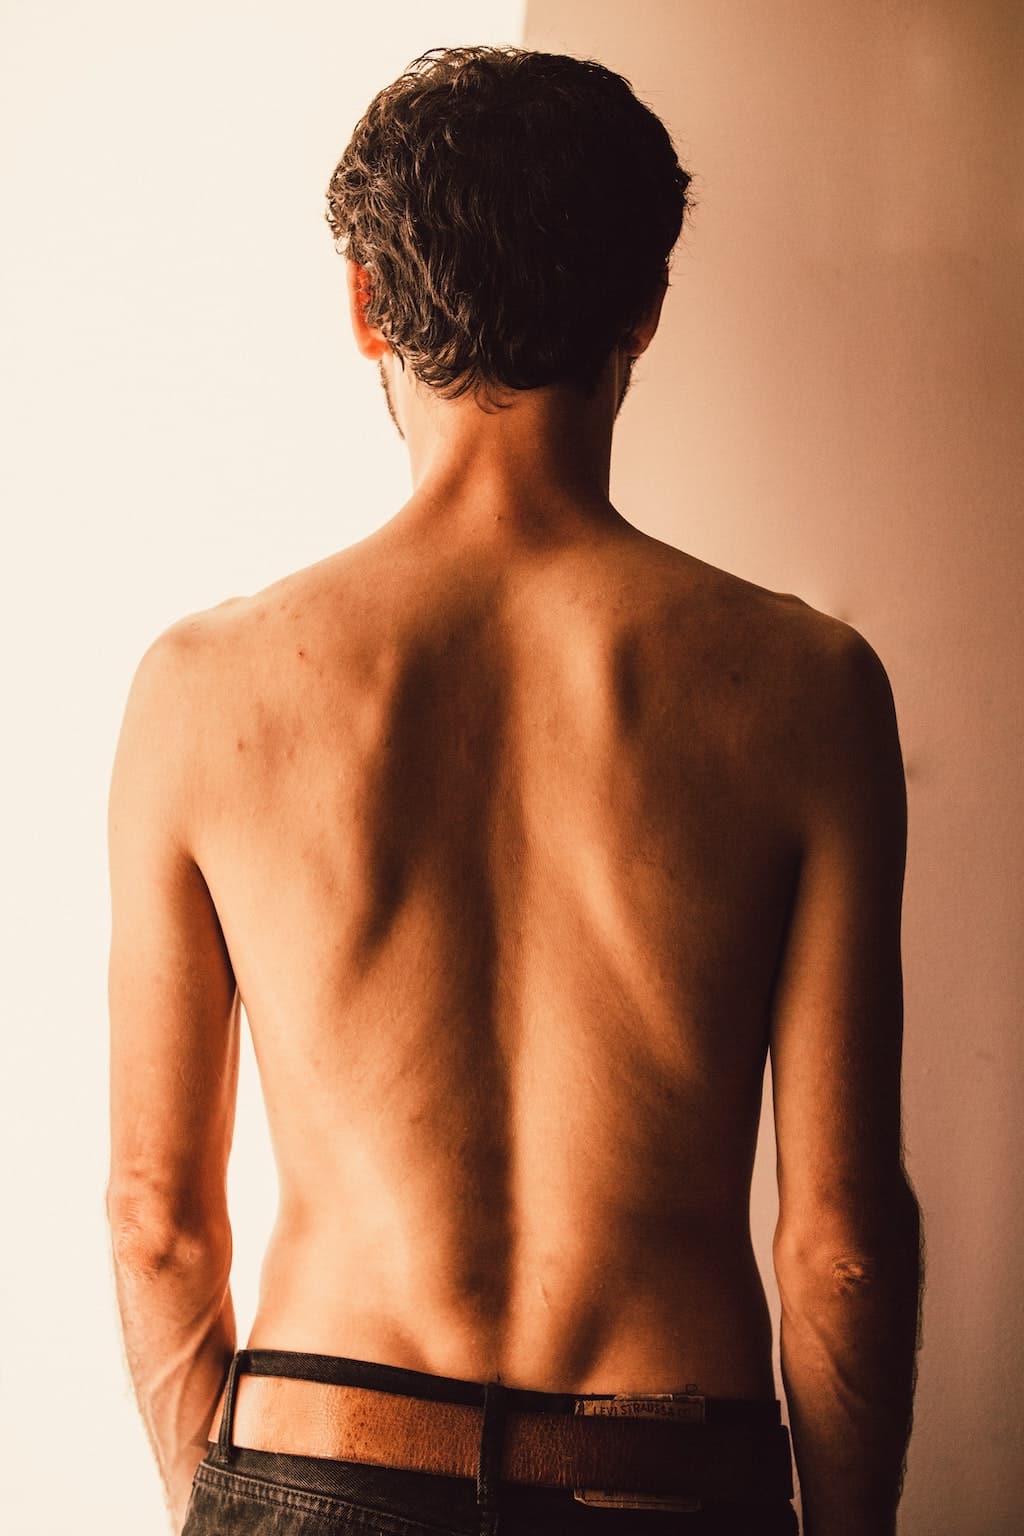 A photo of a woman's back standing straight